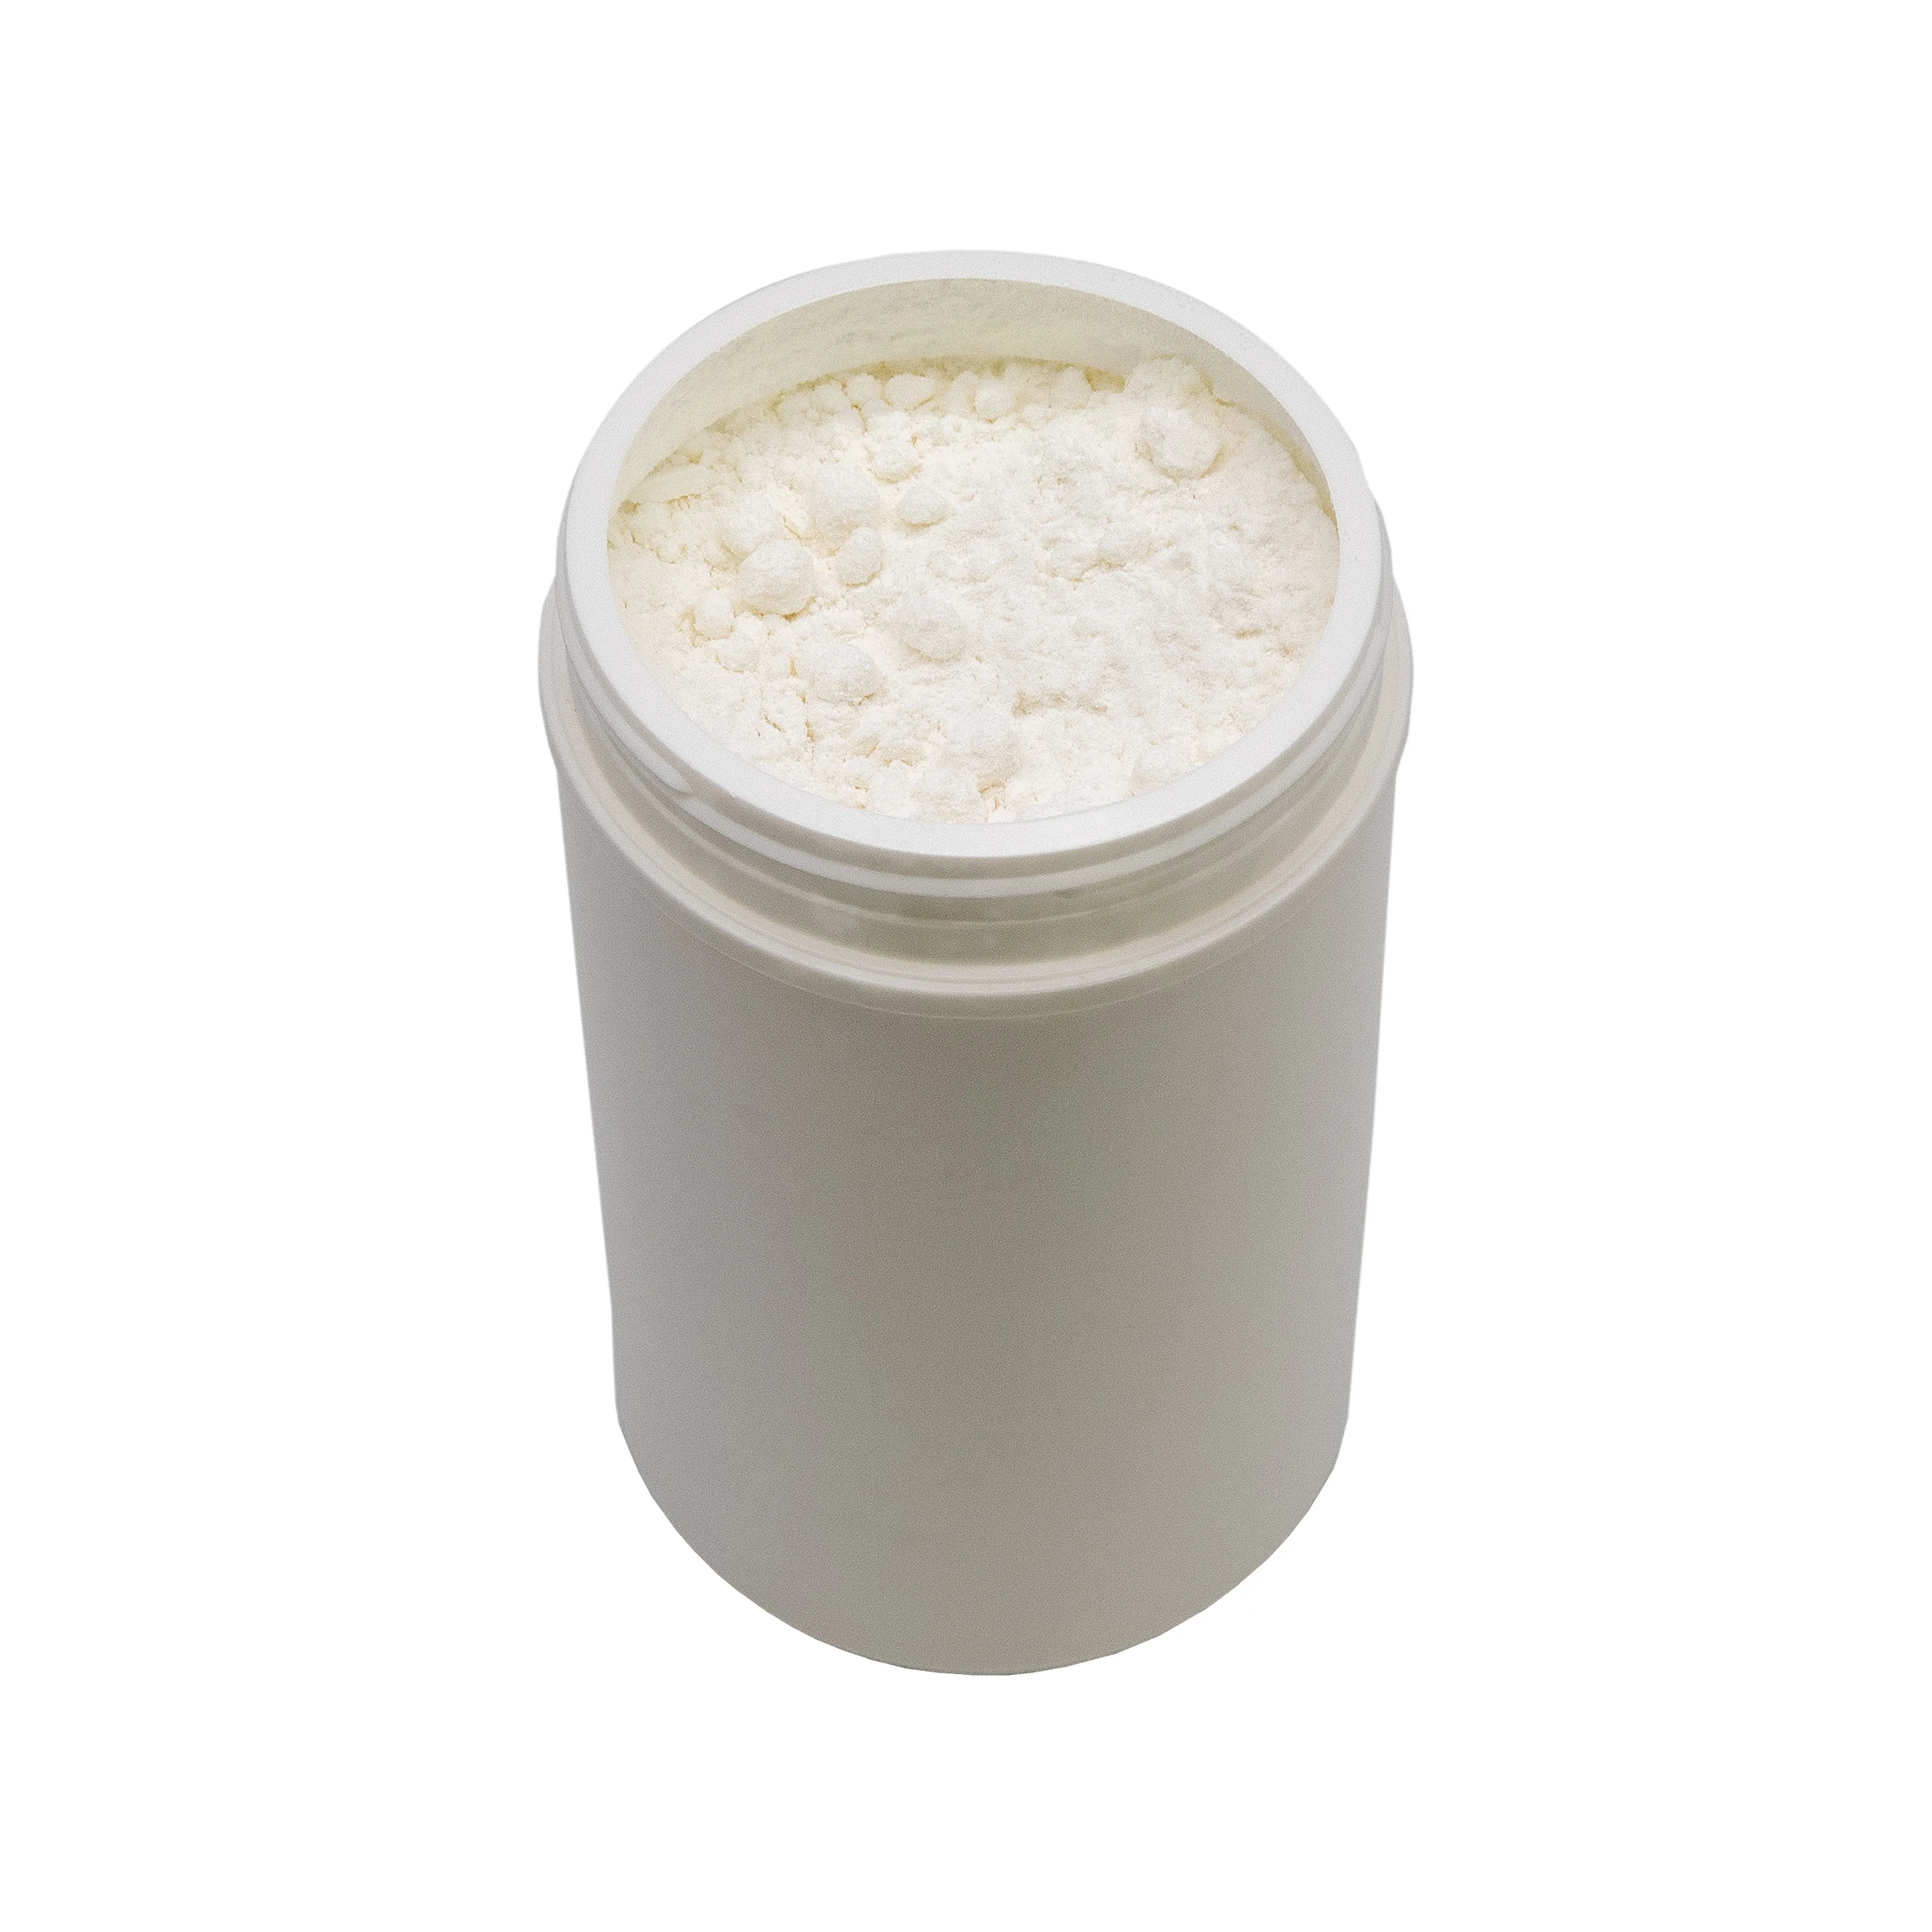 Private Label Organic CBD Isolate Powder Made in USA Low Price Fast Shipping LOW MOQs No THC Bulk (11000000070576)